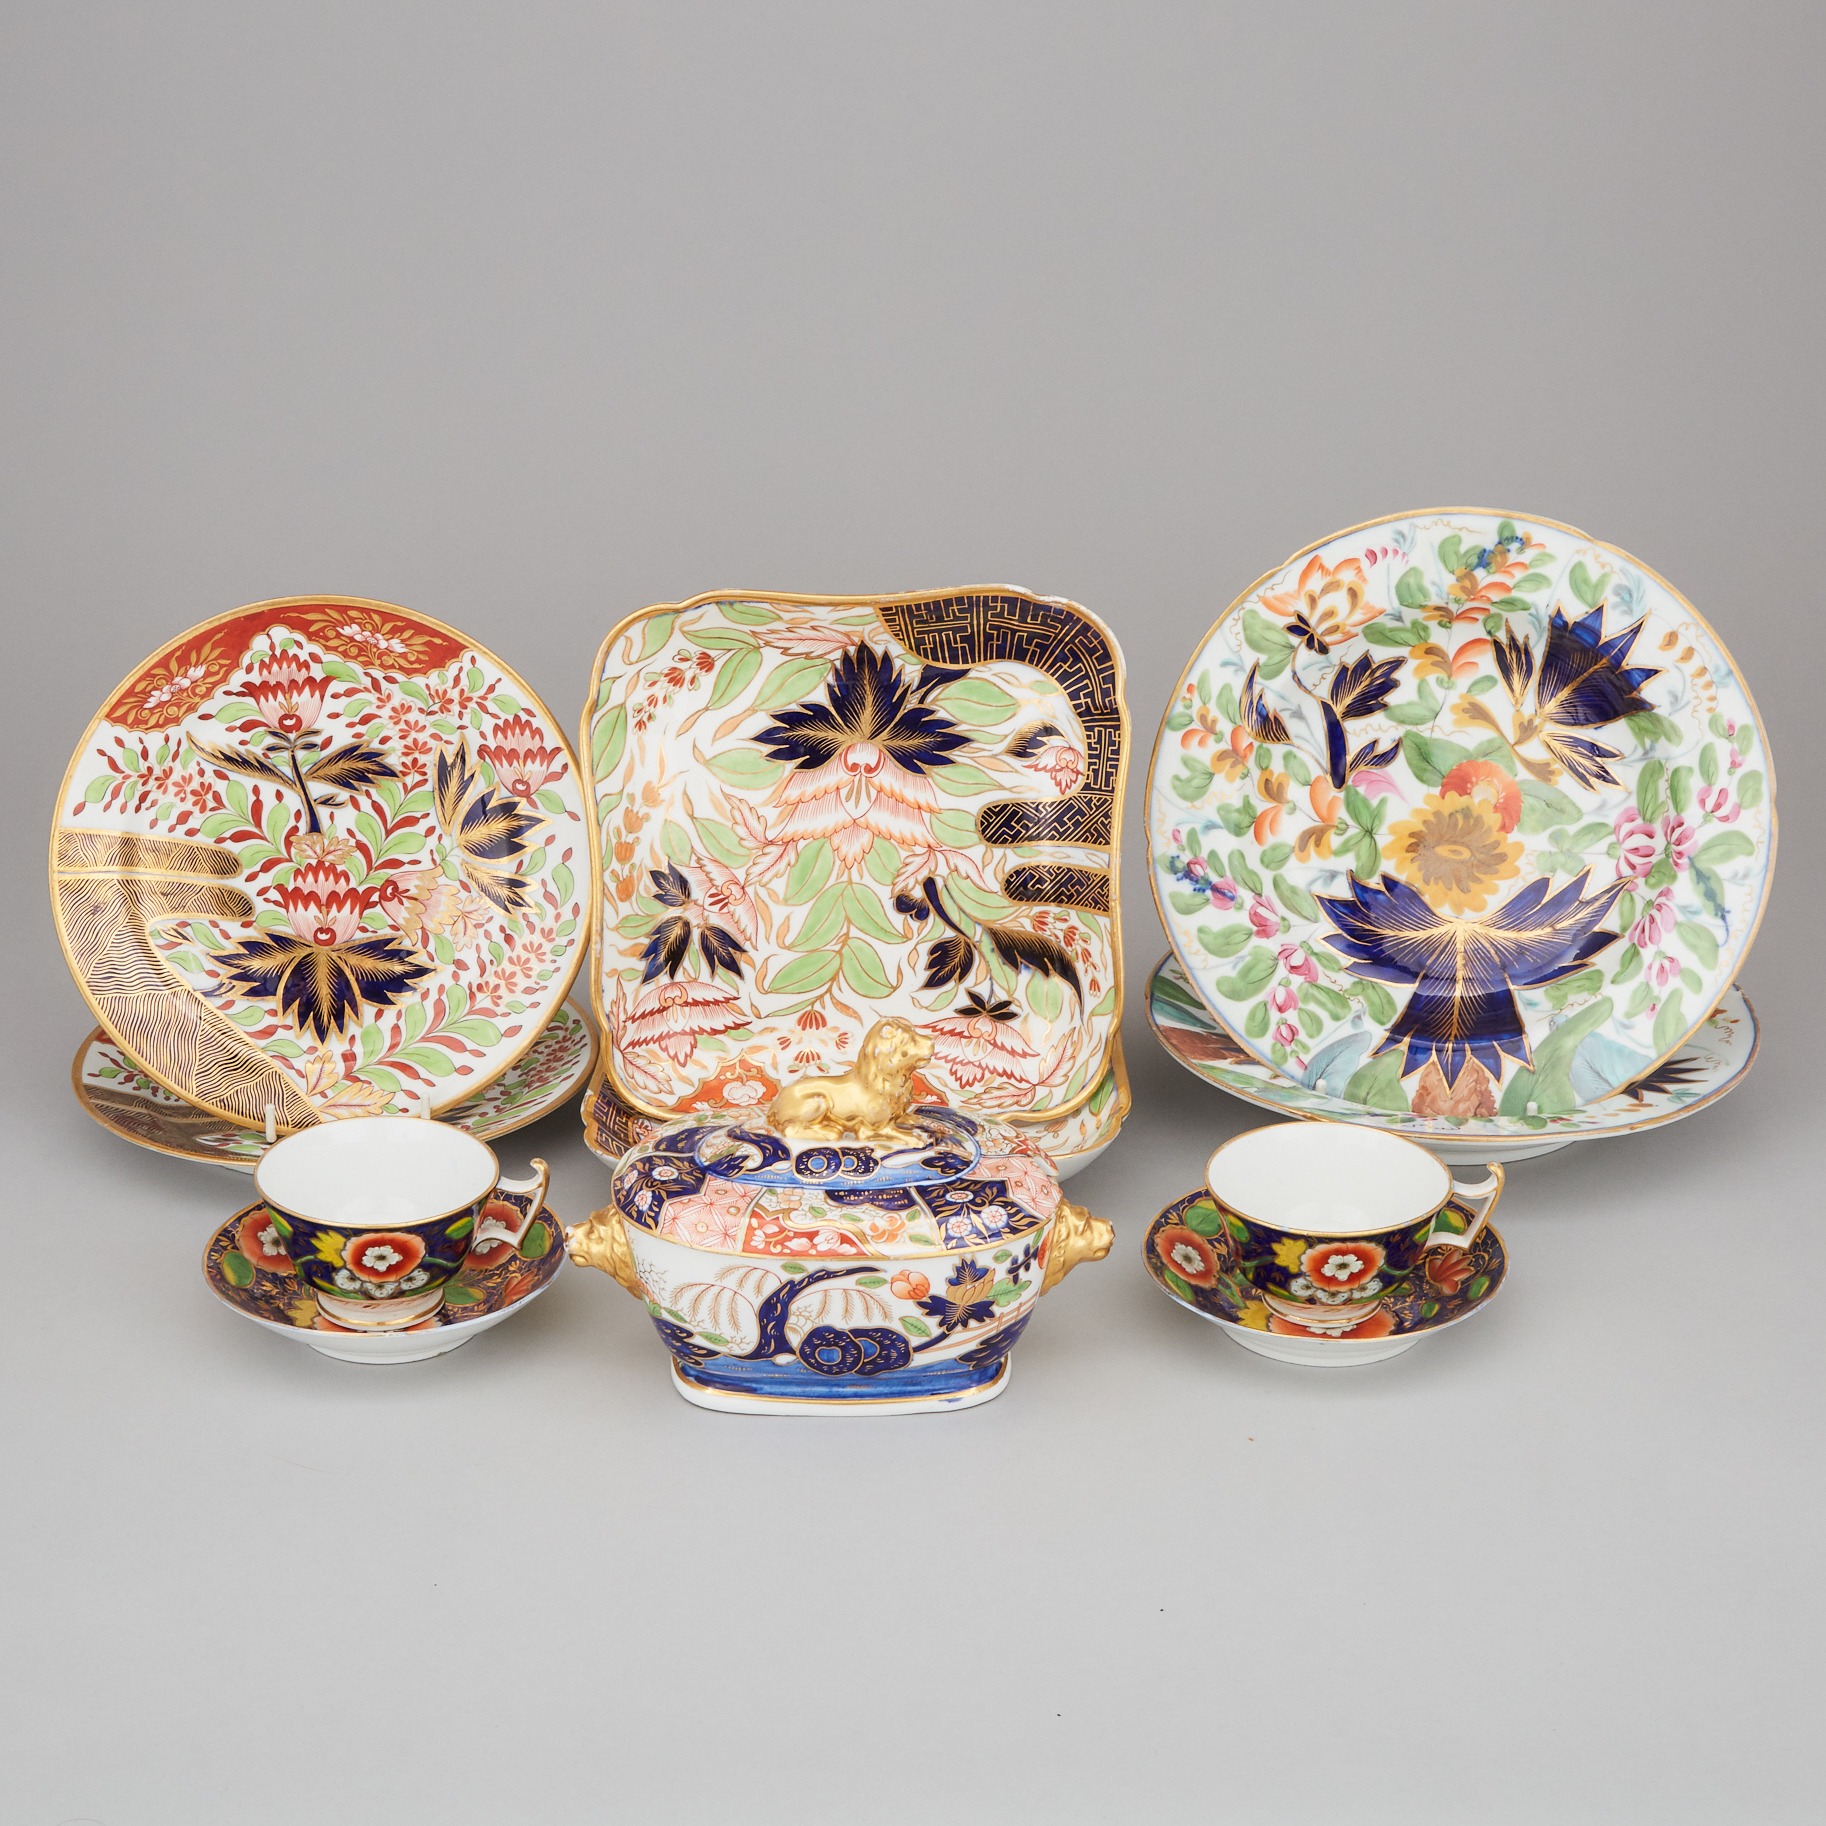 Group of Coalport and Chamberlains Worcester Japan Pattern Tablewares, early 19th century